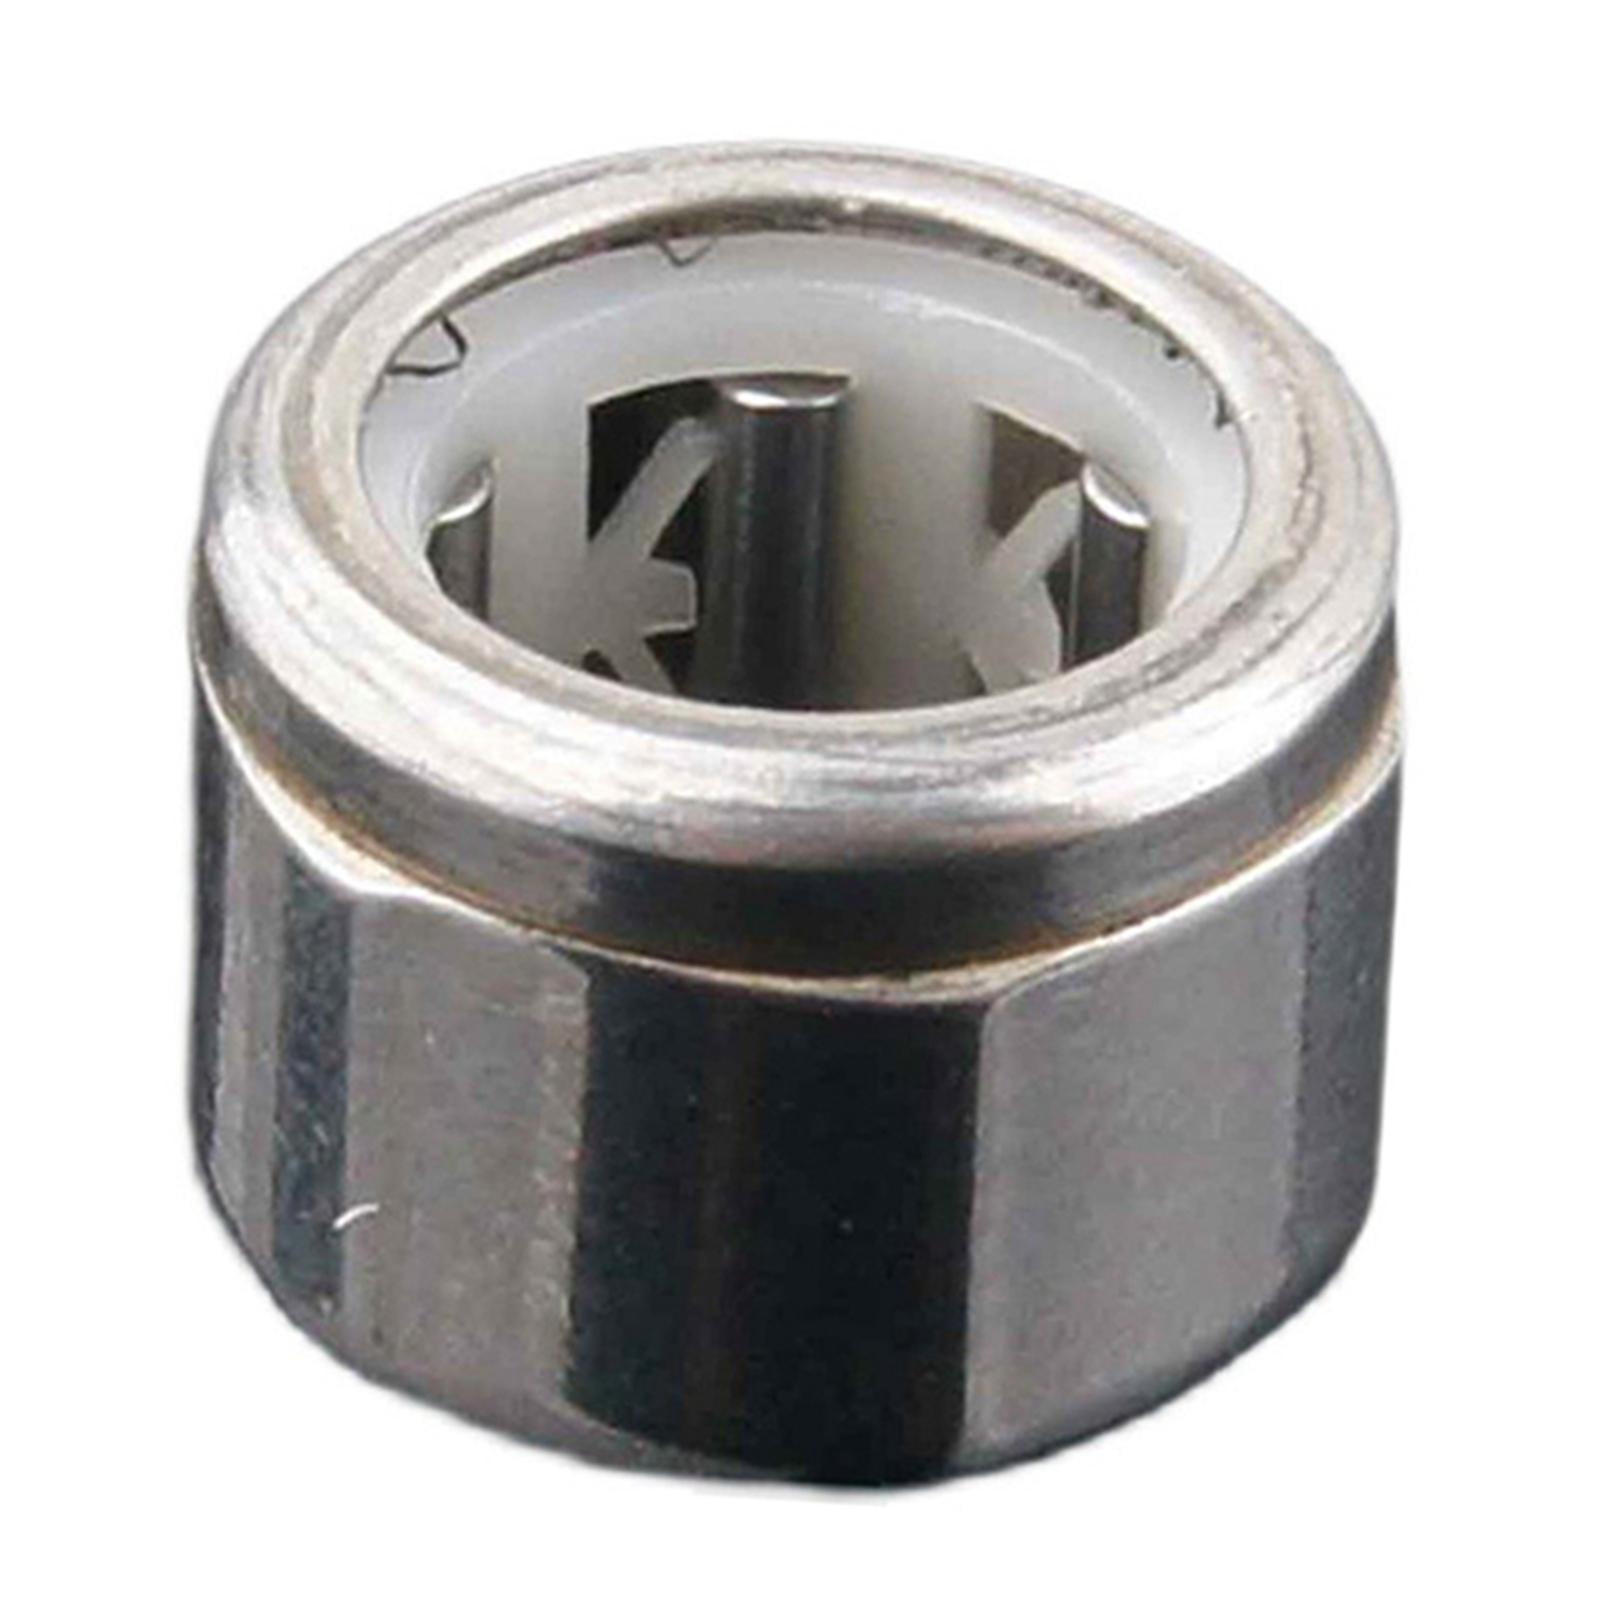 Parts & Accessories 02067 Metal One Way Hex Bearing RC HSP for 1/10 Original Part On-Road Car/Buggy,for a Variety of HSP Models 